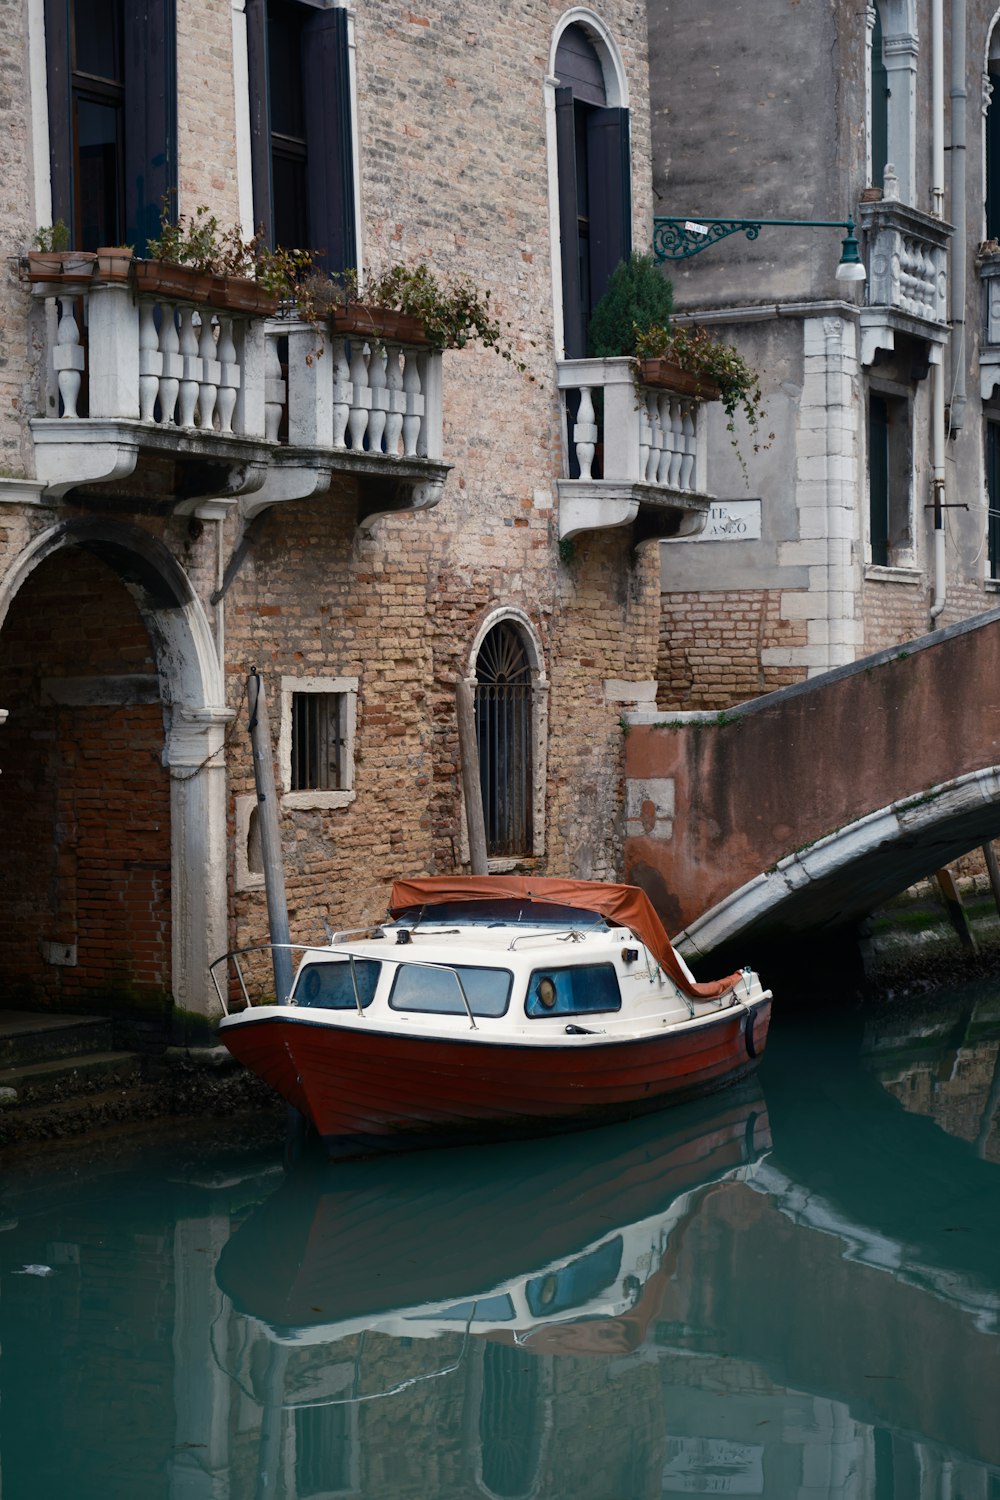 a small boat is docked in a canal